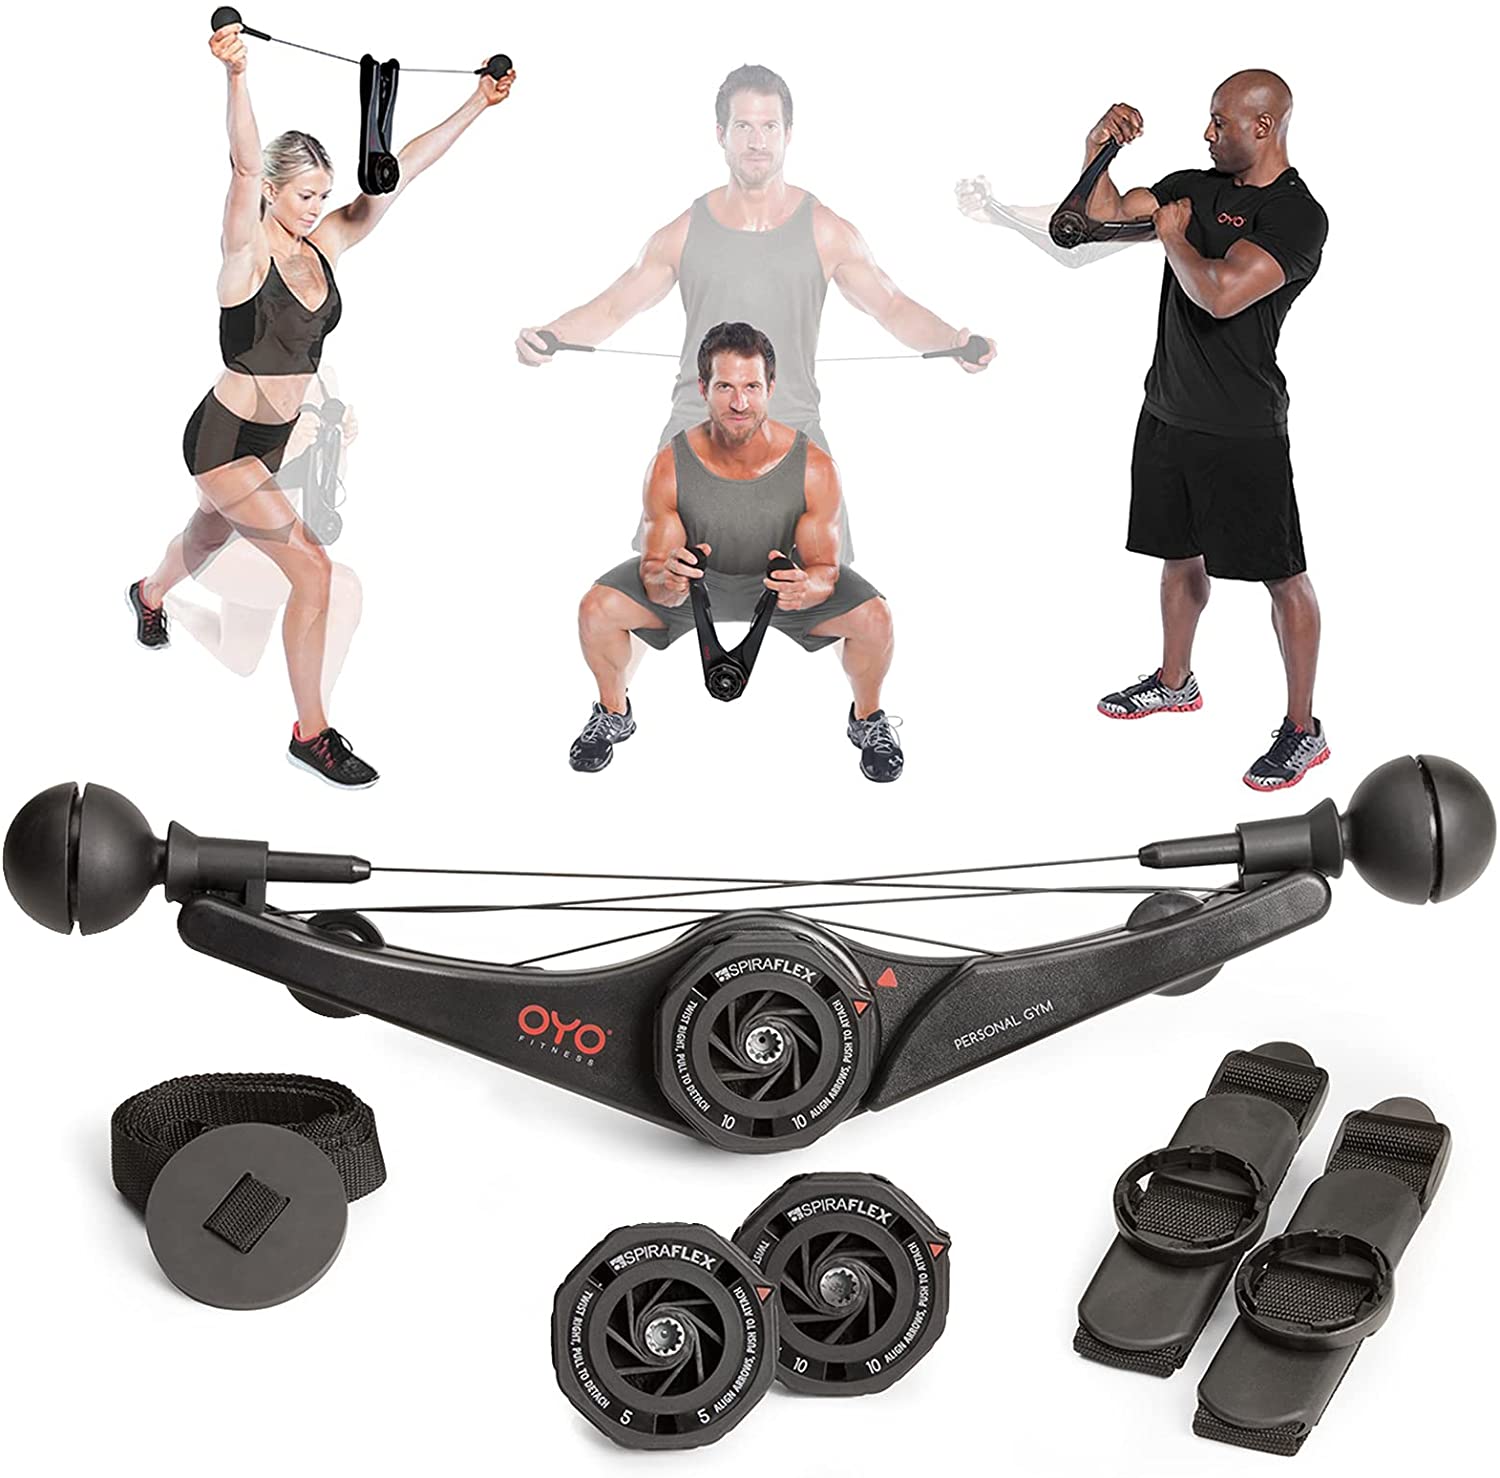 OYO Personal Gym Review